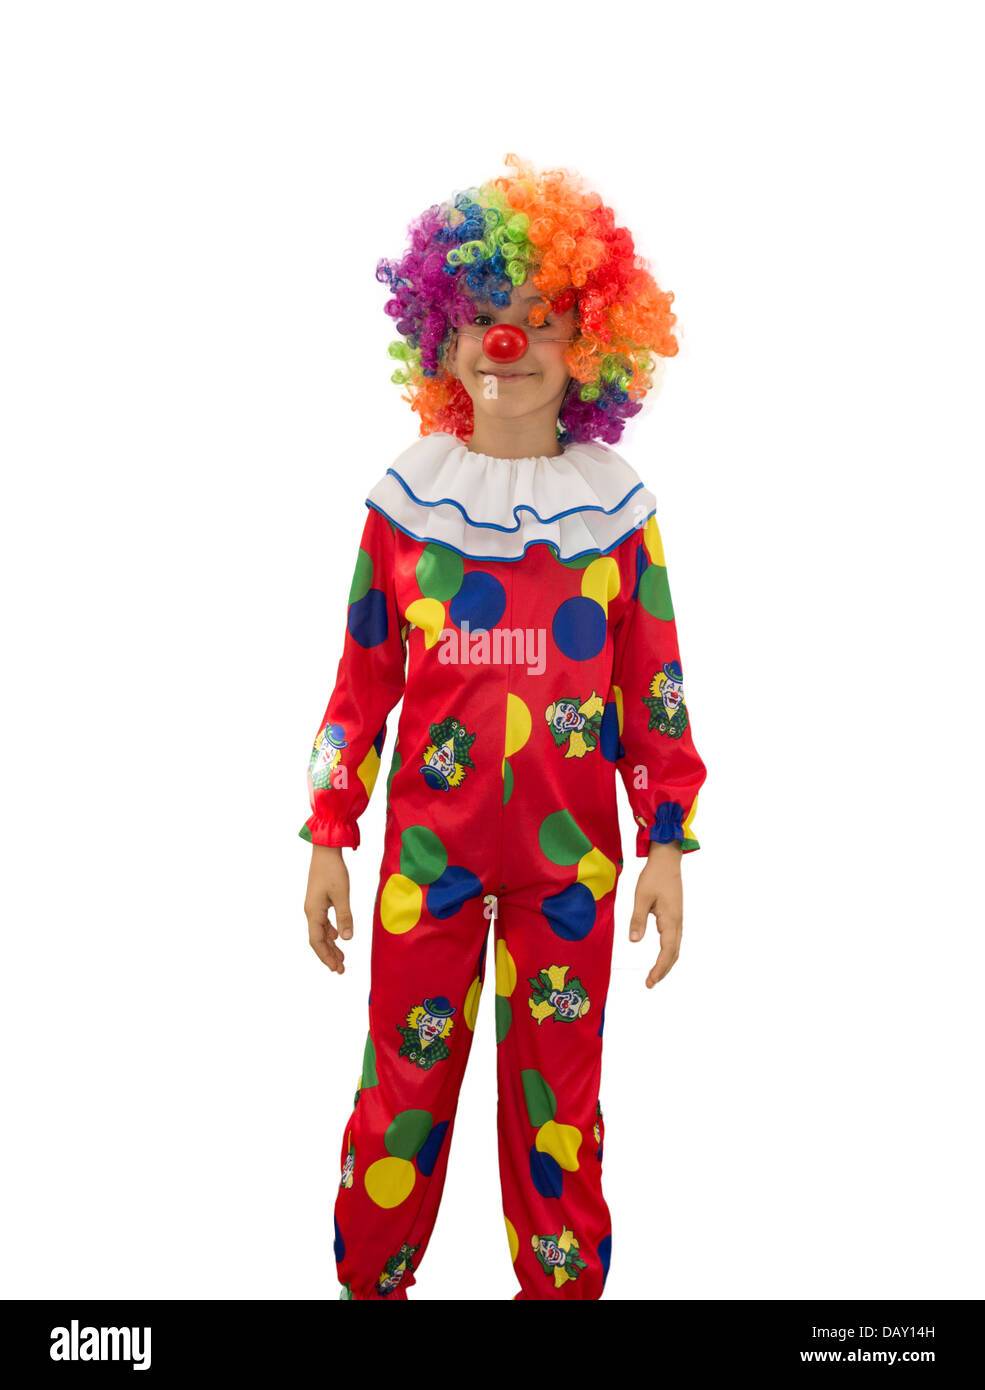 funny clown in colorful wig Stock Photo